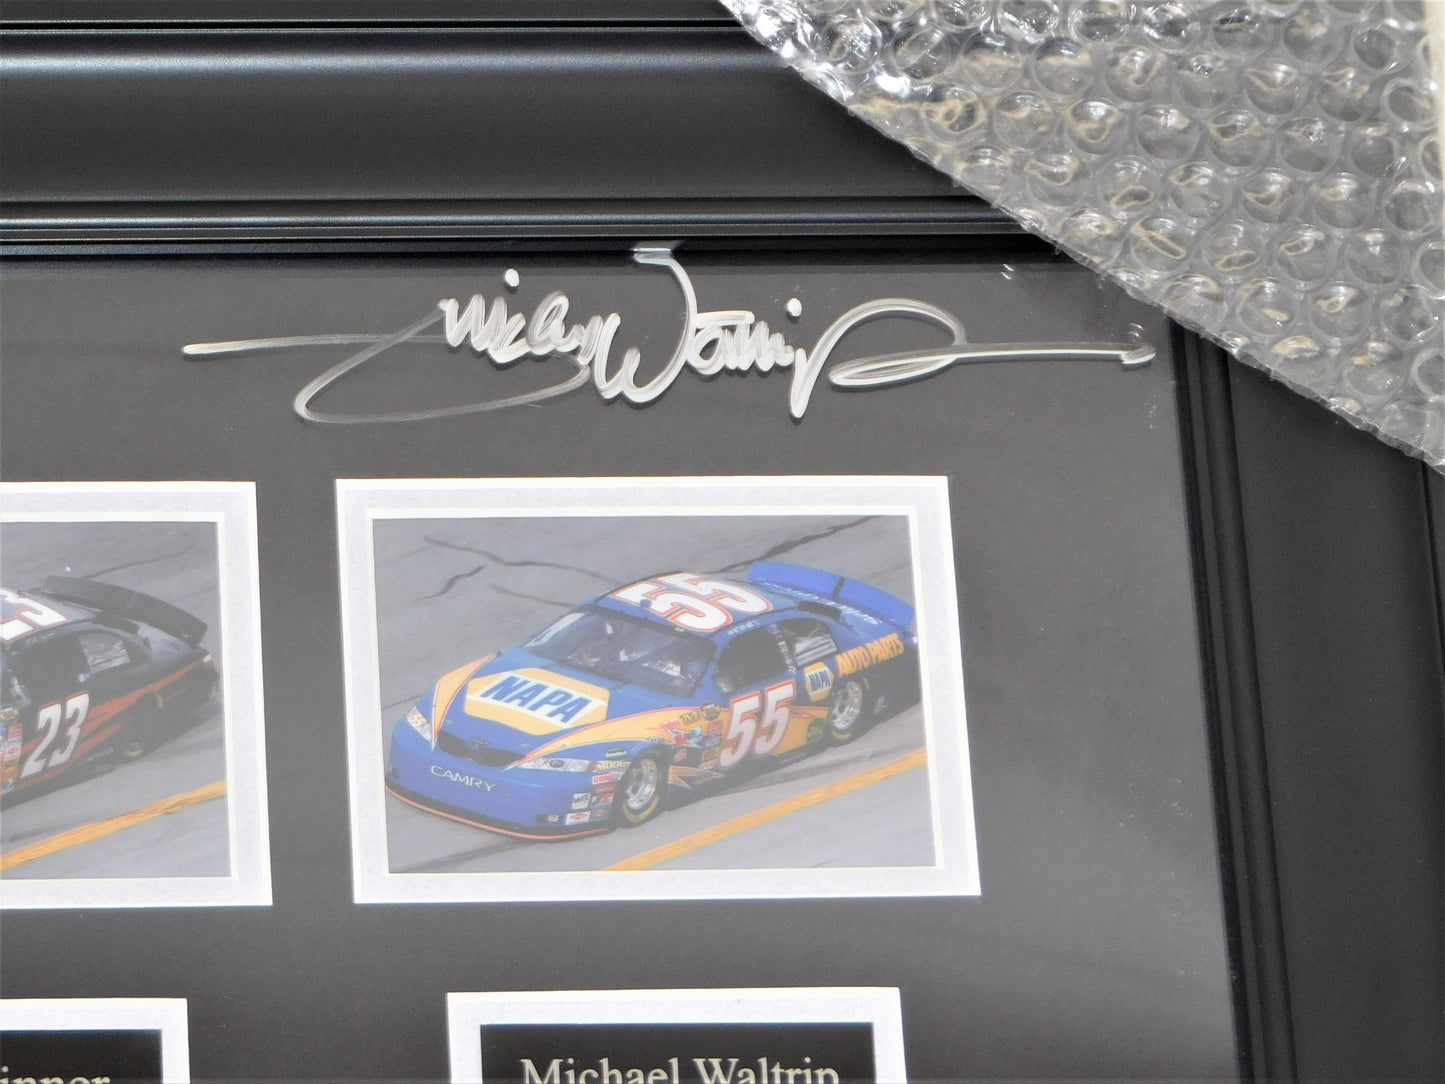 2007 Toyota Joins NASCAR Cup Series Commemorative Frame